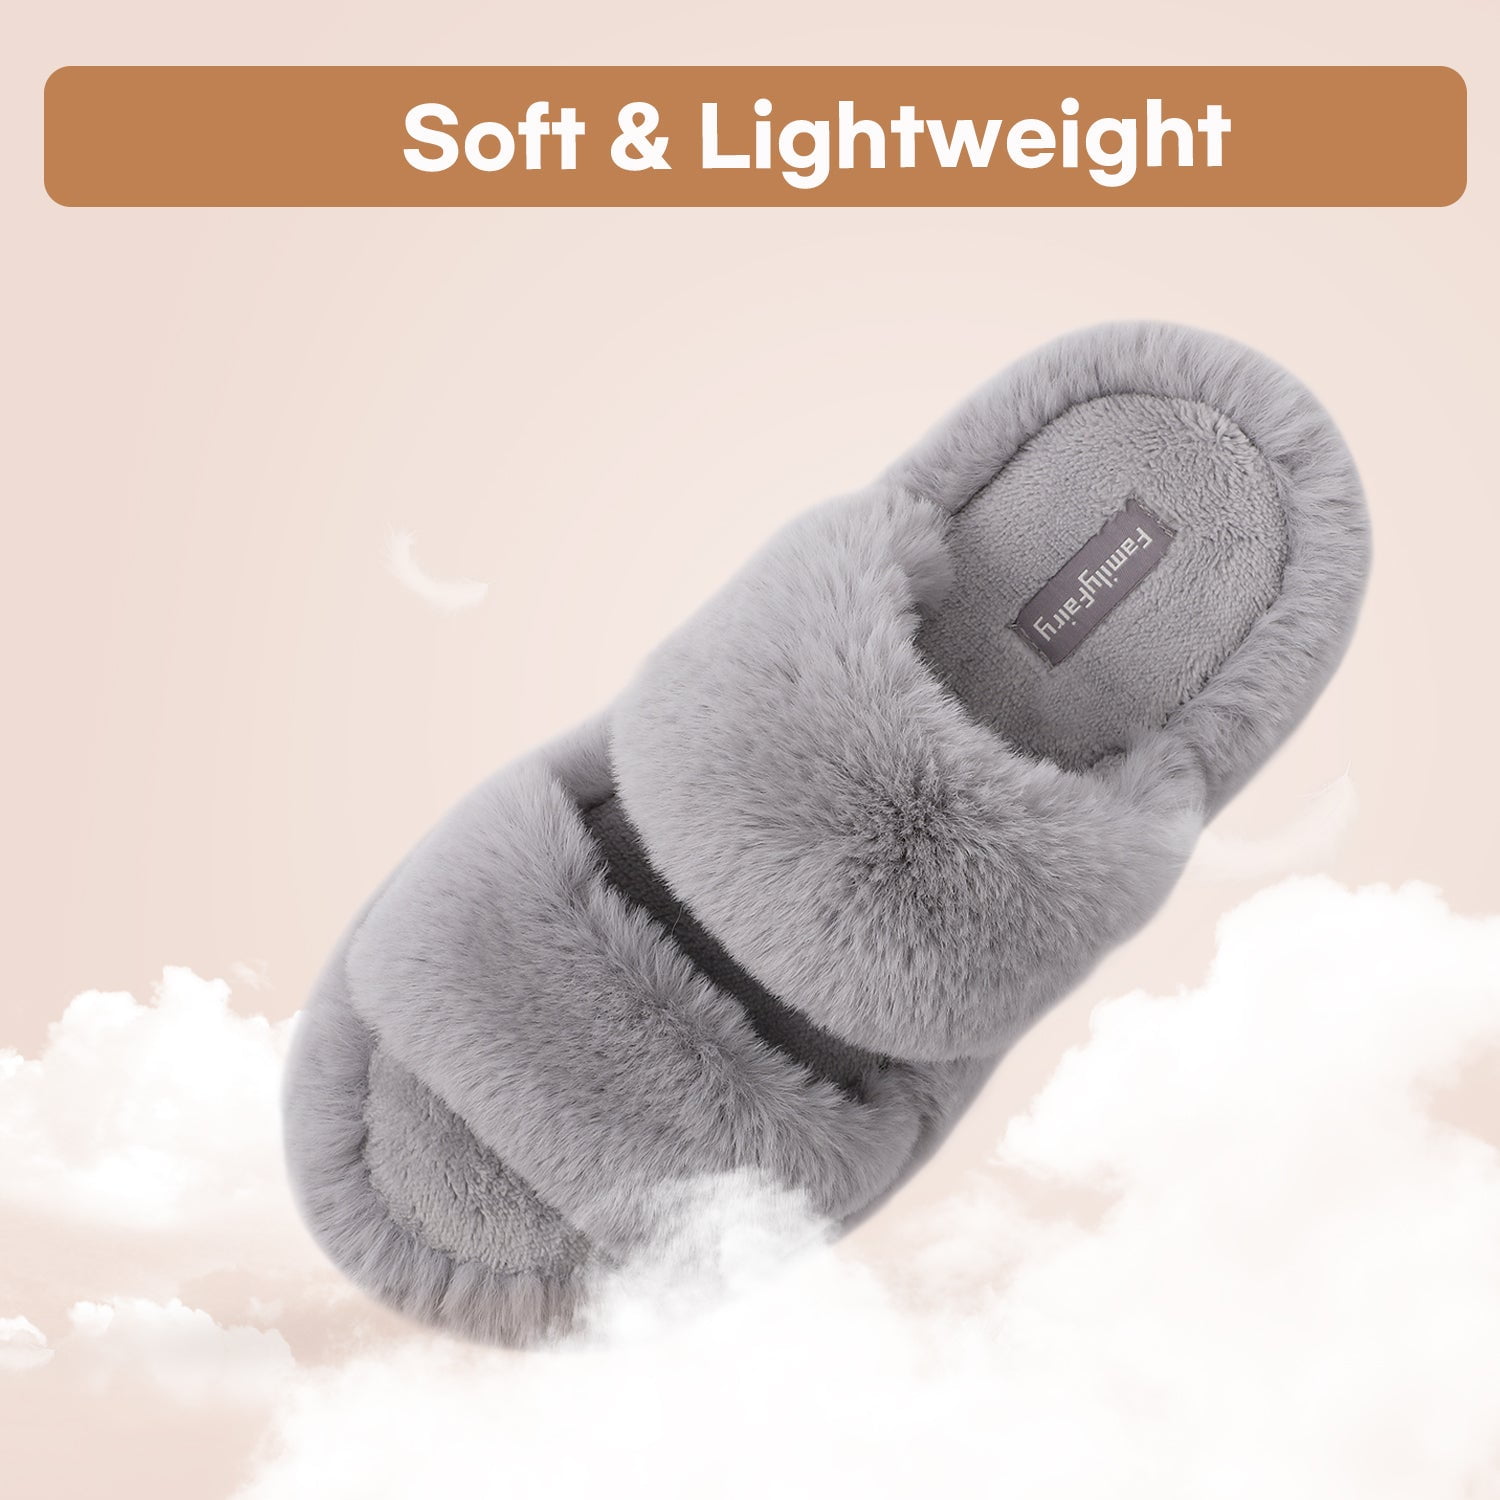 Fluffxfluff / Open Toe Fluffy Slippers / Crossover Band 